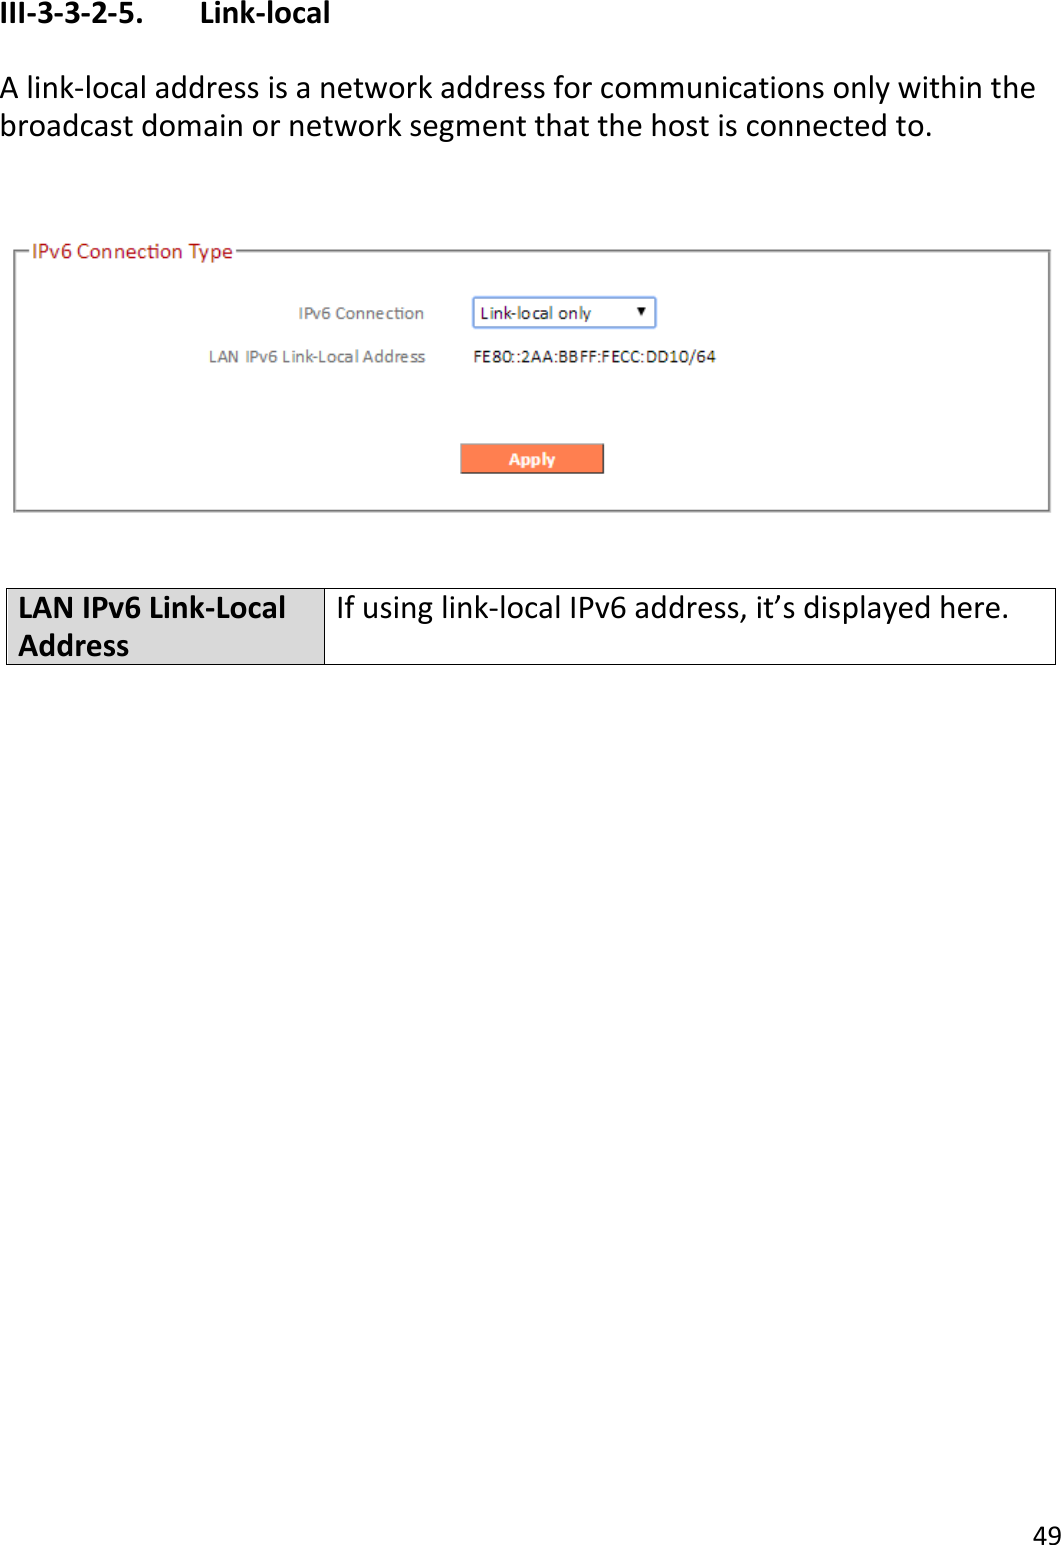 49  III-3-3-2-5.    Link-local  A link-local address is a network address for communications only within the broadcast domain or network segment that the host is connected to.      LAN IPv6 Link-Local Address If using link-local IPv6 address, it’s displayed here.      